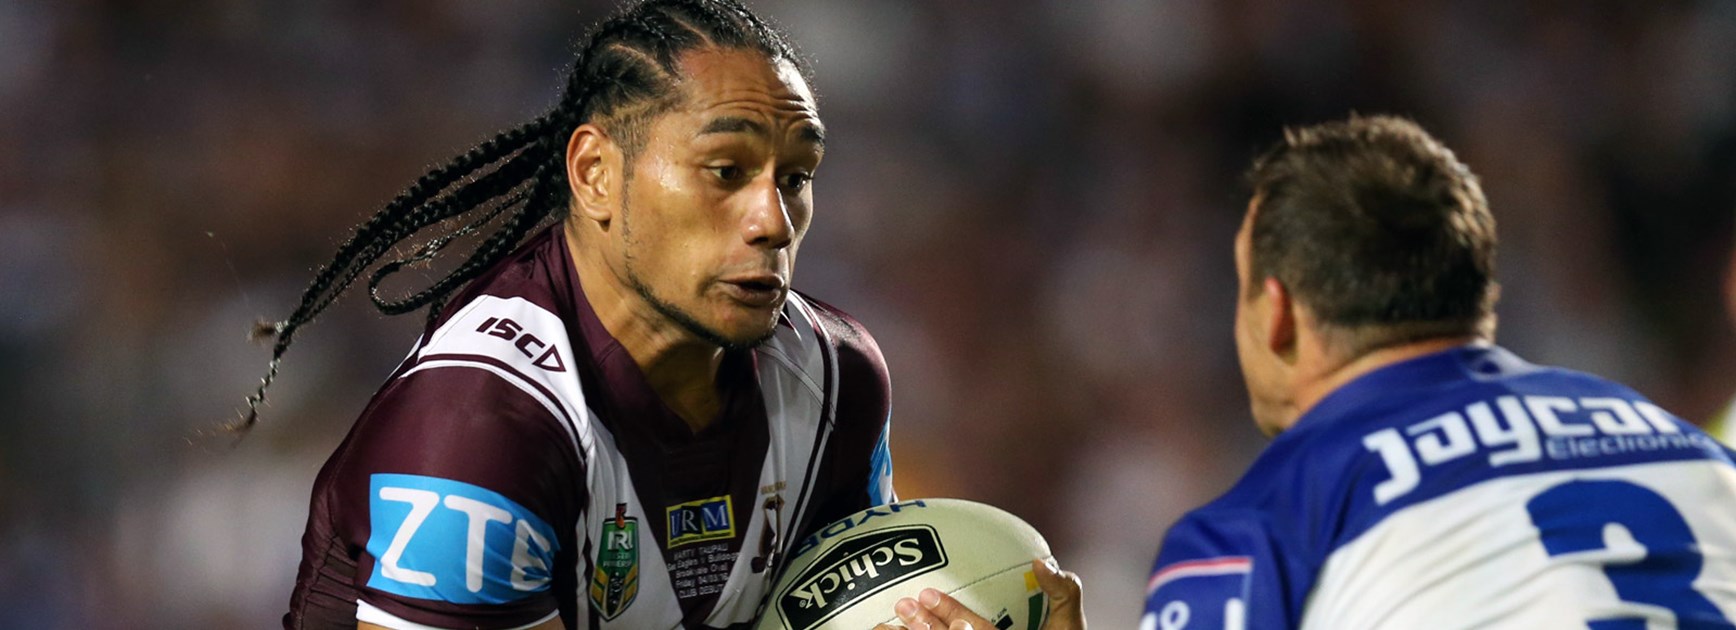 Martin Taupau during his Manly debut at Brookvale Oval in Round 1.